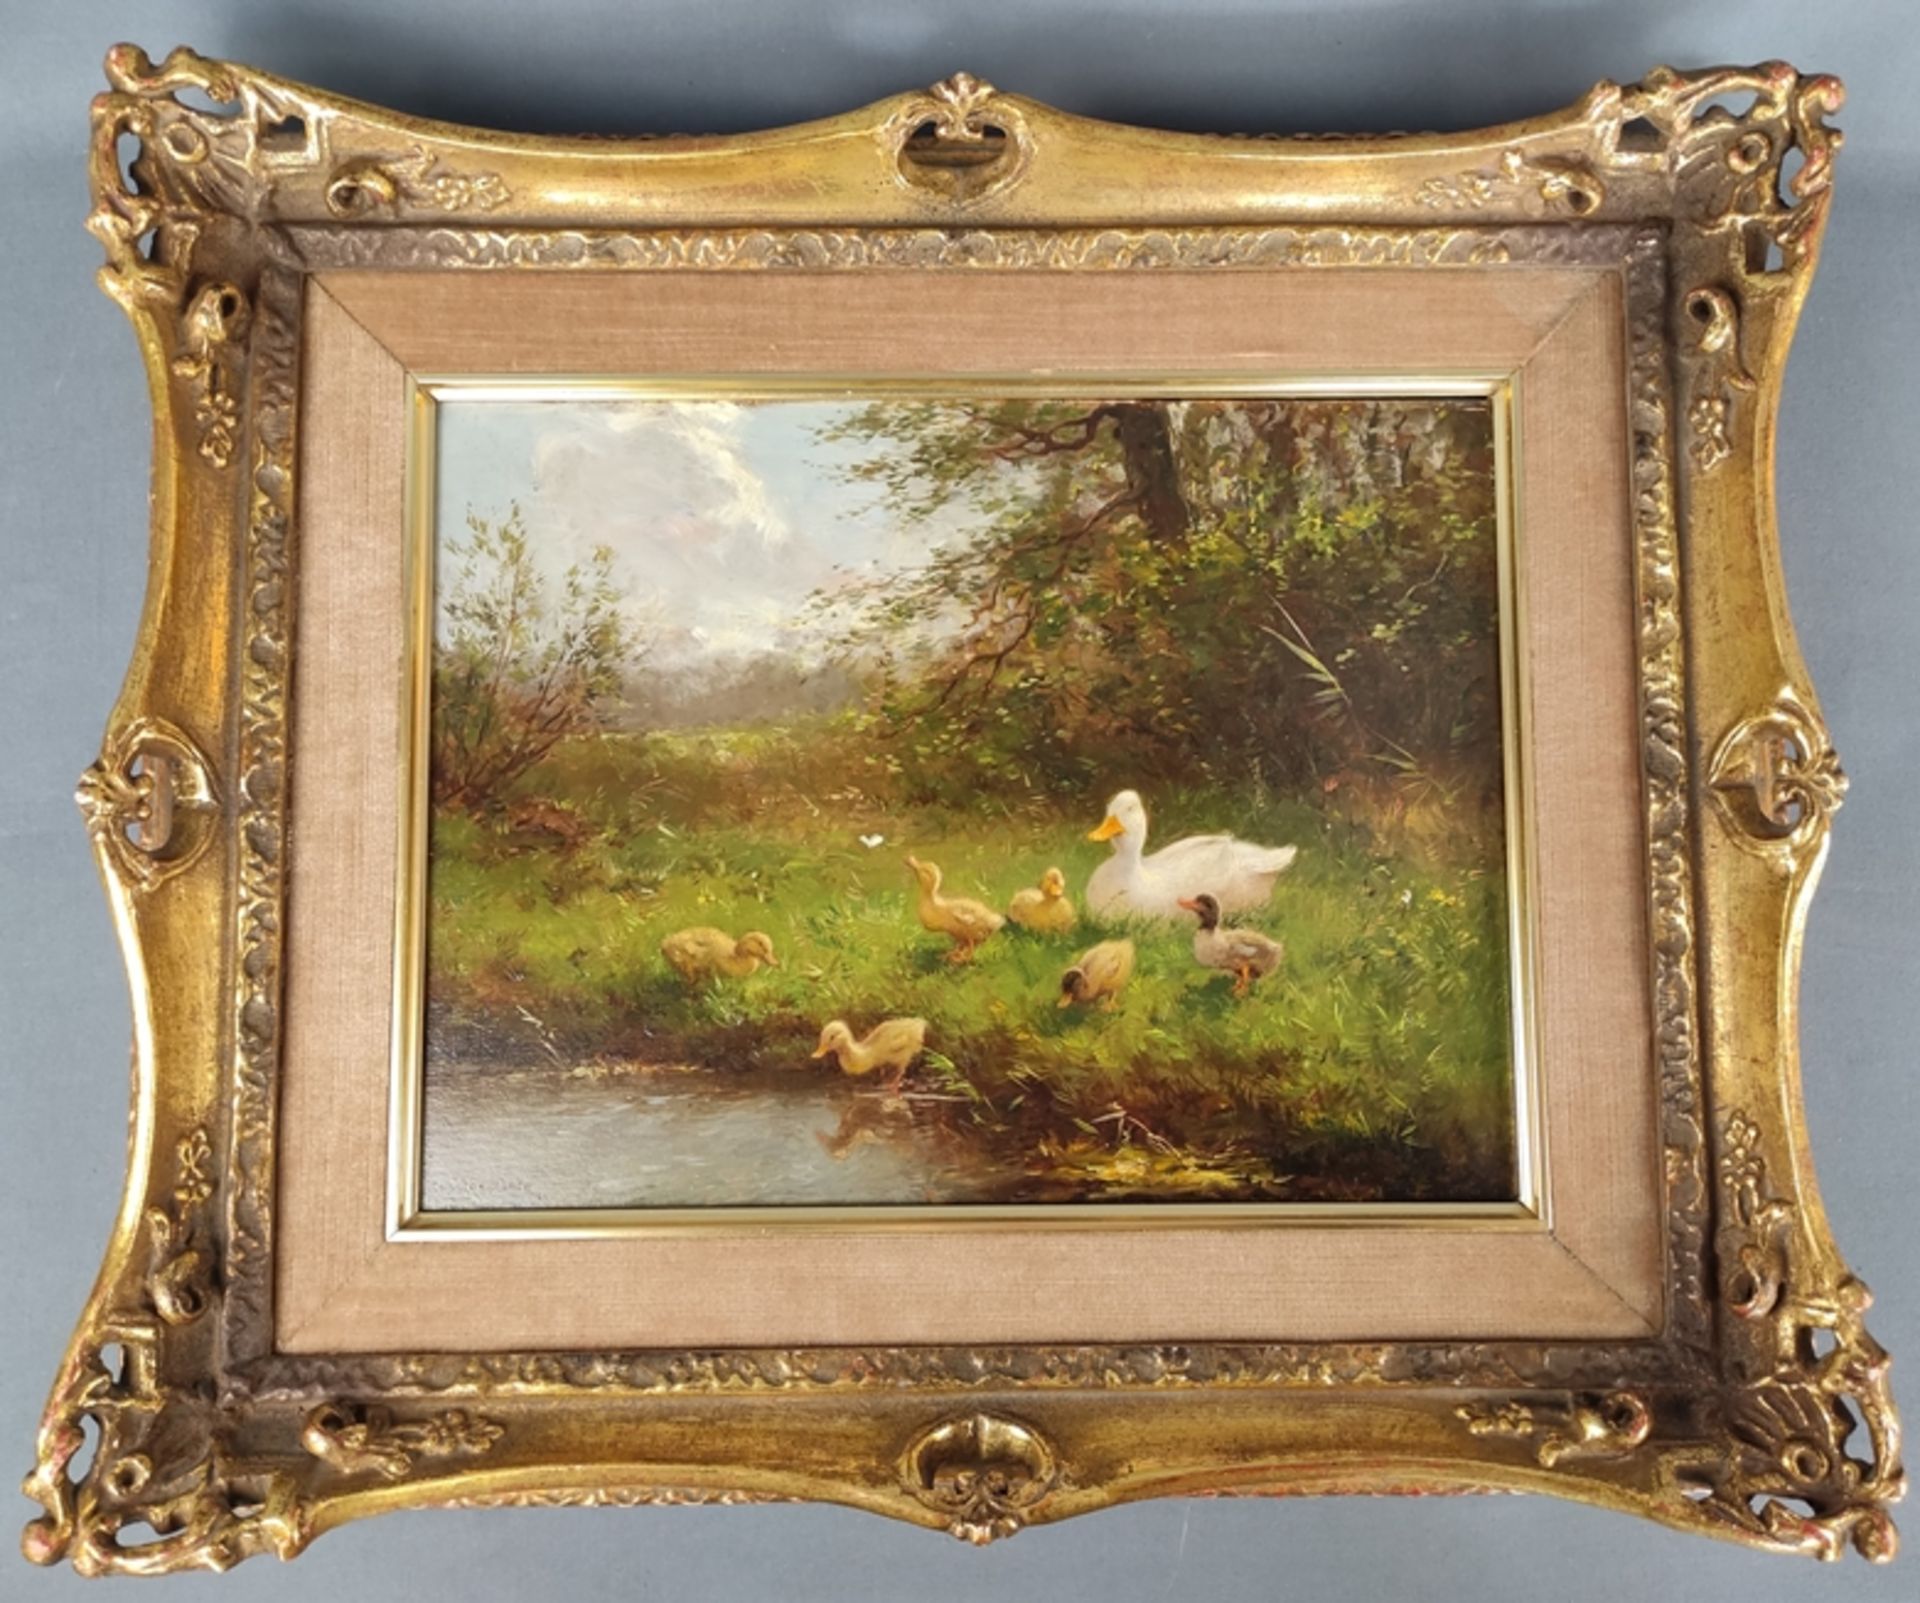 Artz, Constant (1870 Paris -1951 Soest) "Duck Family on the Riverbank", proud mother duck with her  - Image 2 of 4